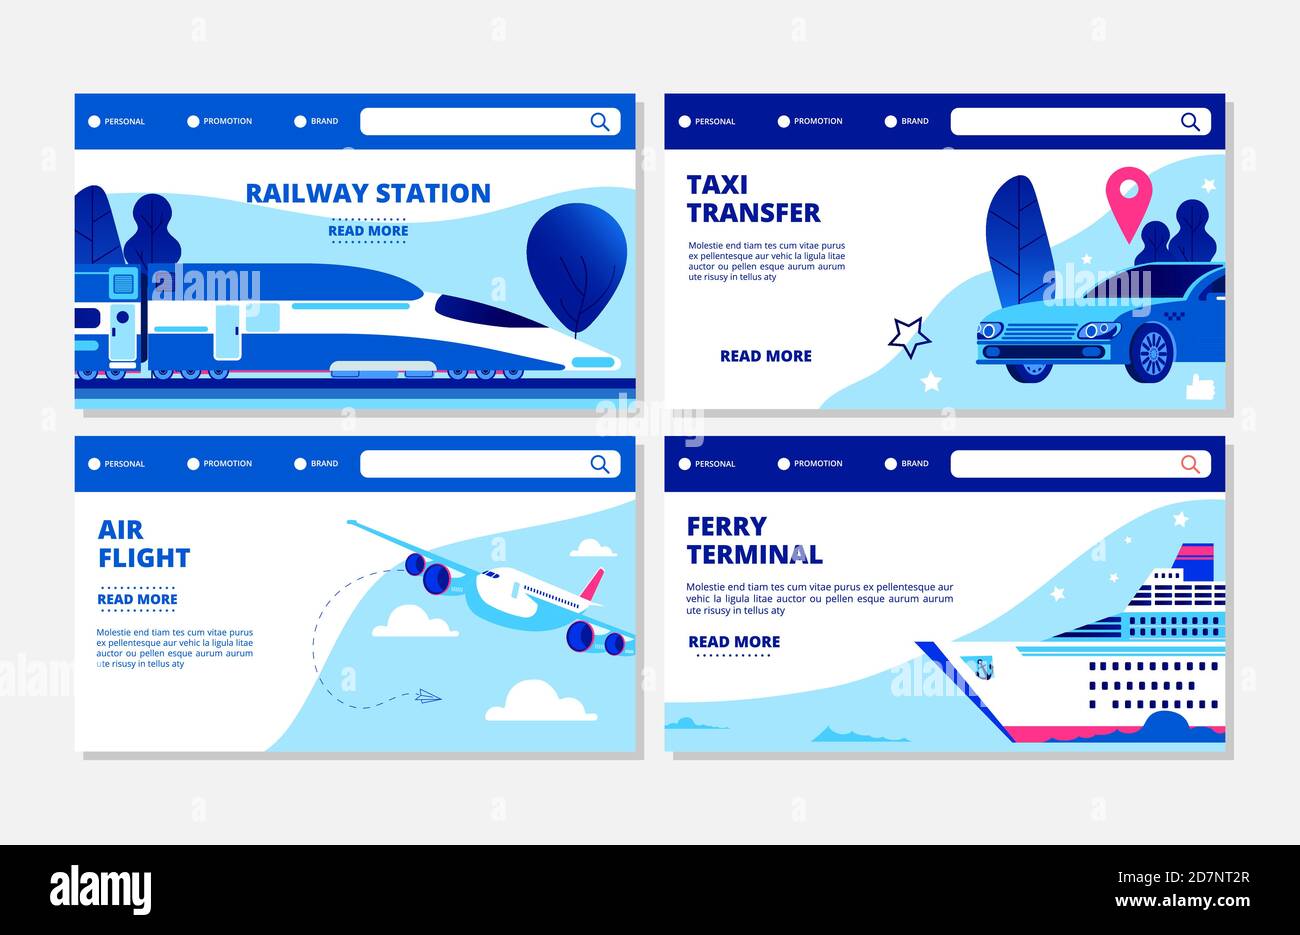 Transportation vector banners. Ferry terminal, air flight, taxi, railway station landing page collection. Illustration travel transportation, ferry terminal, air plane Stock Vector